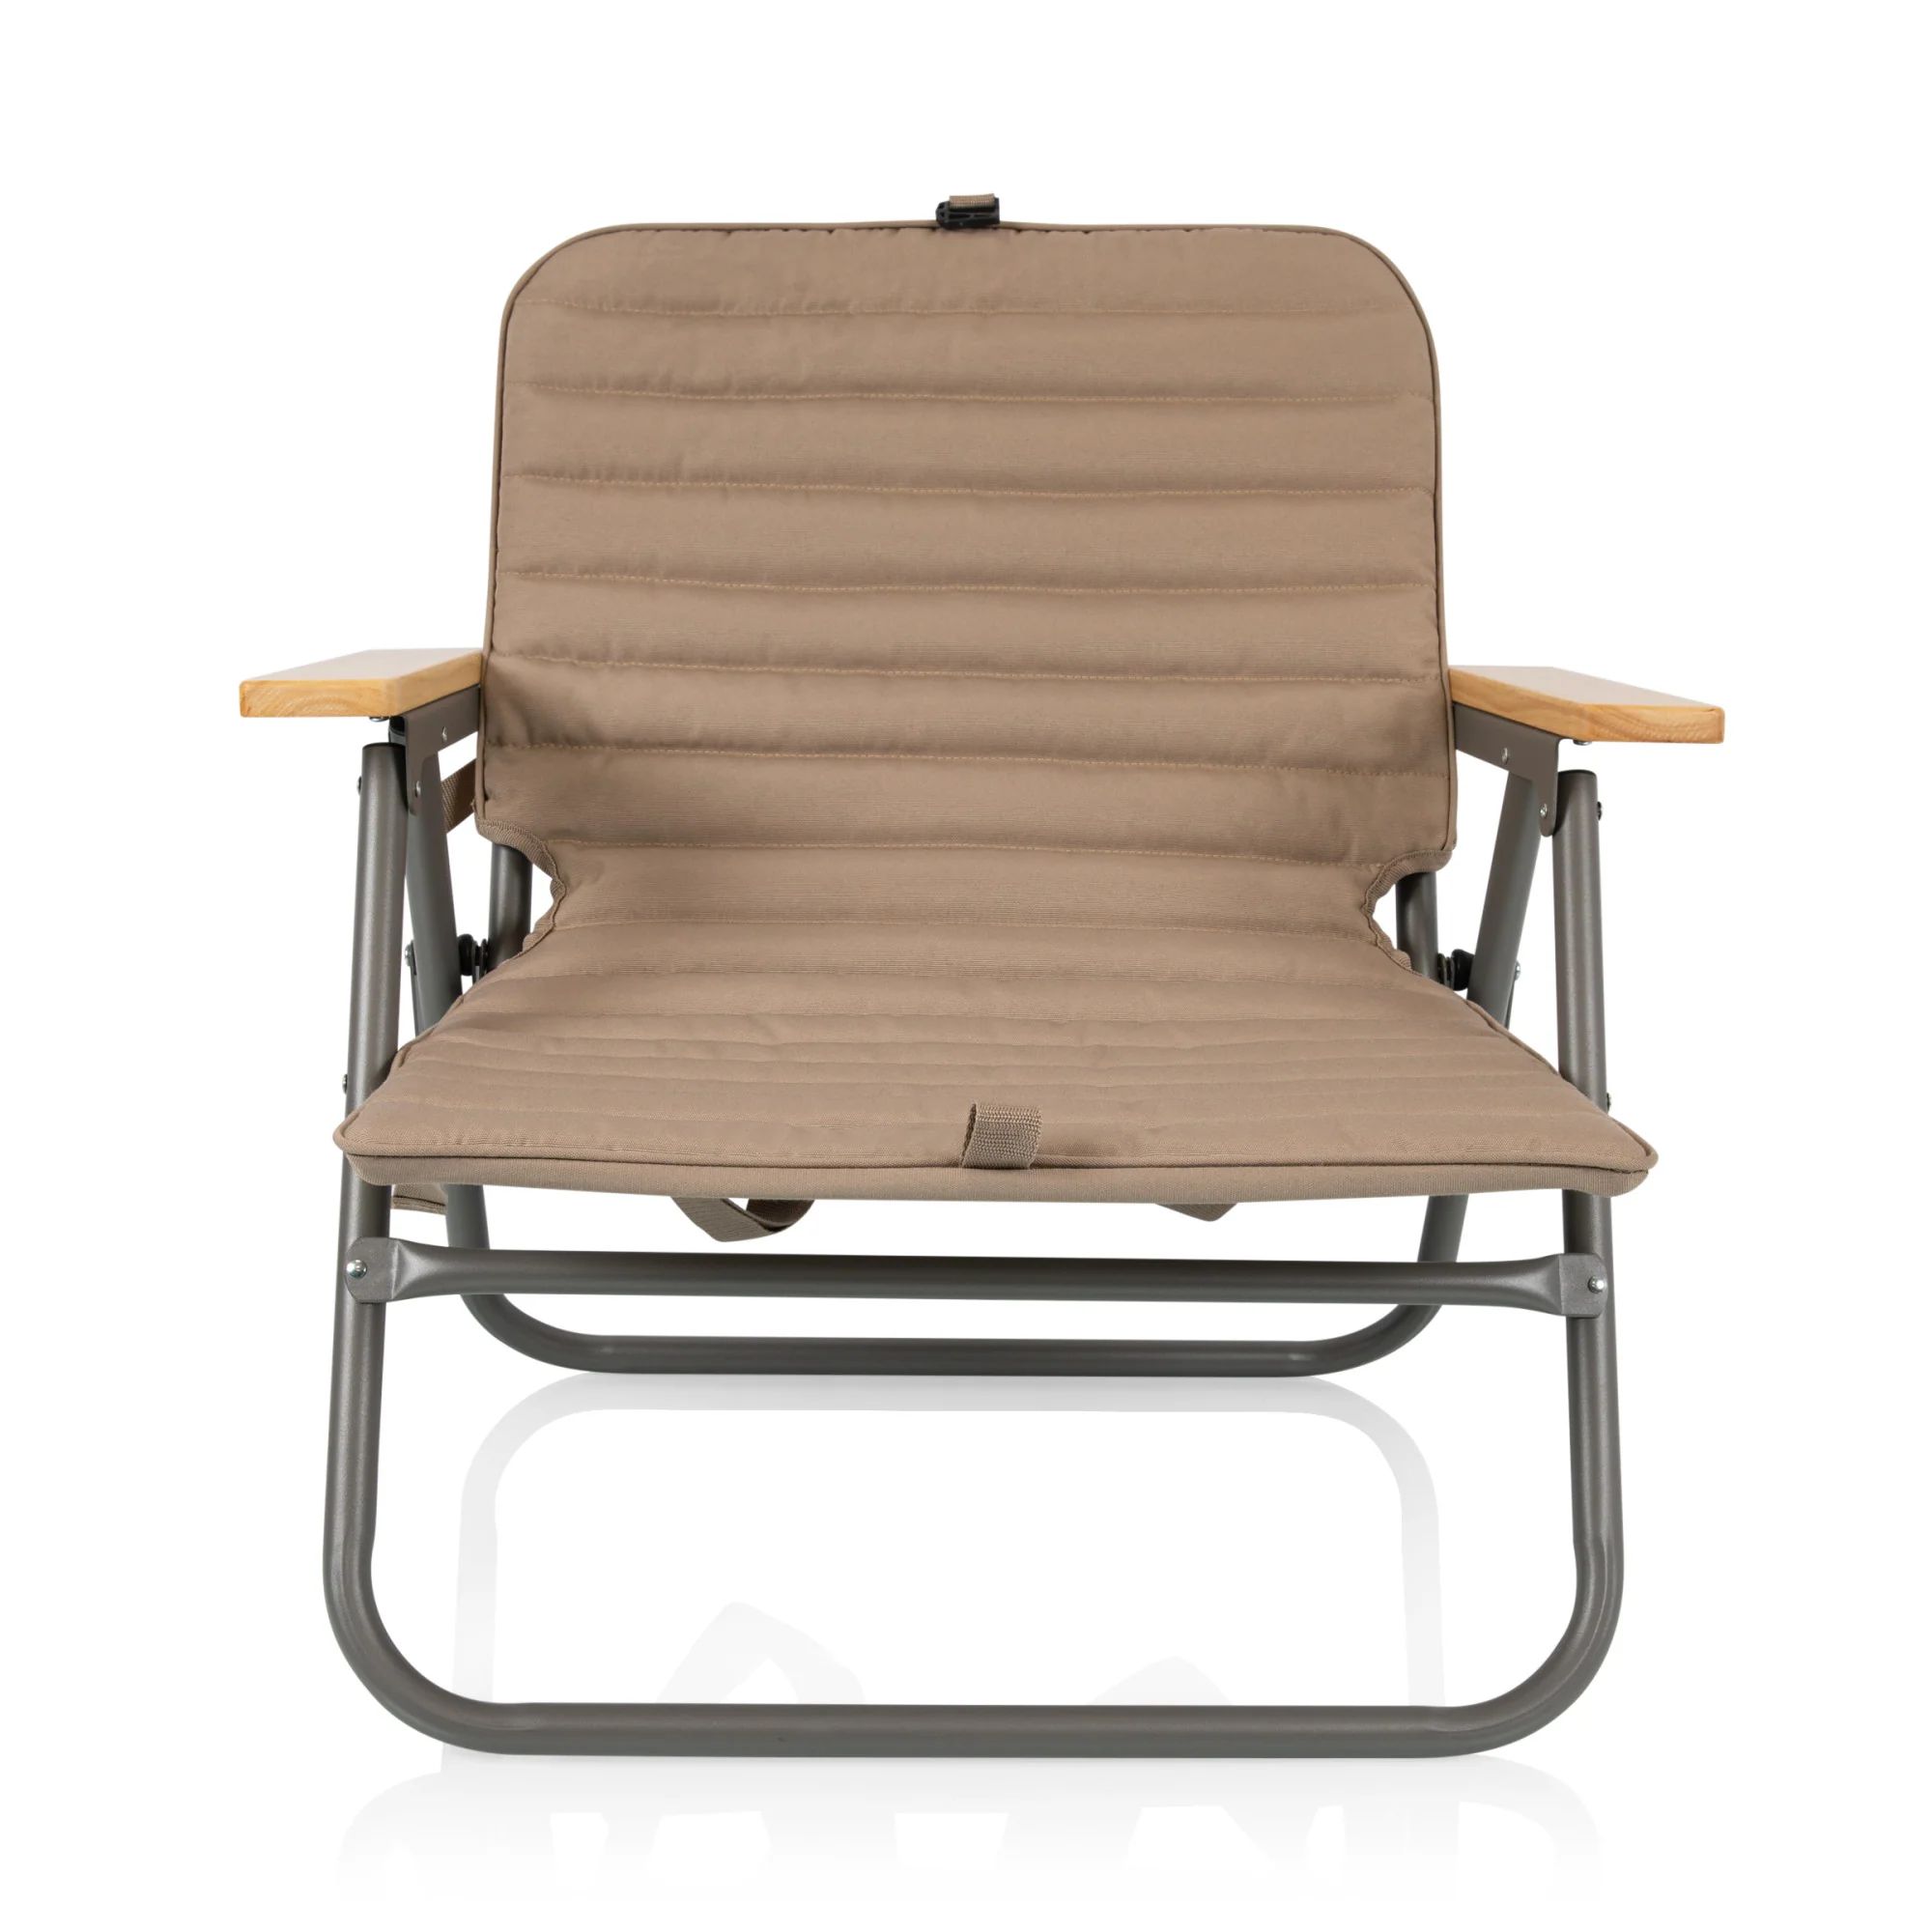 Descanso Padded Beach Chair | Picnic Time